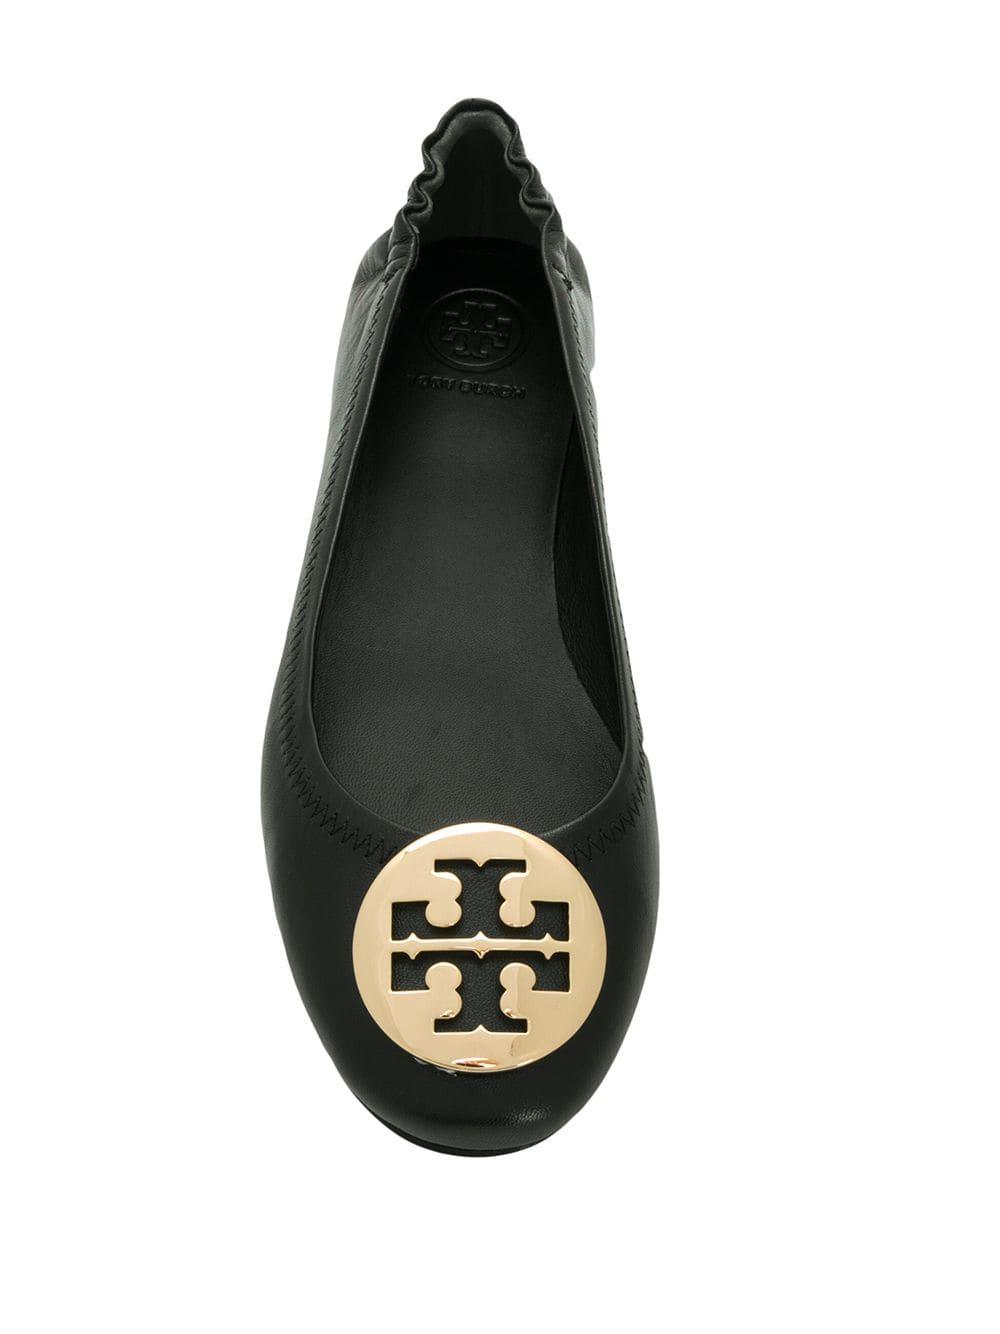 Tory Burch Leather Logo Plaque Ballerina Shoes in Black - Lyst